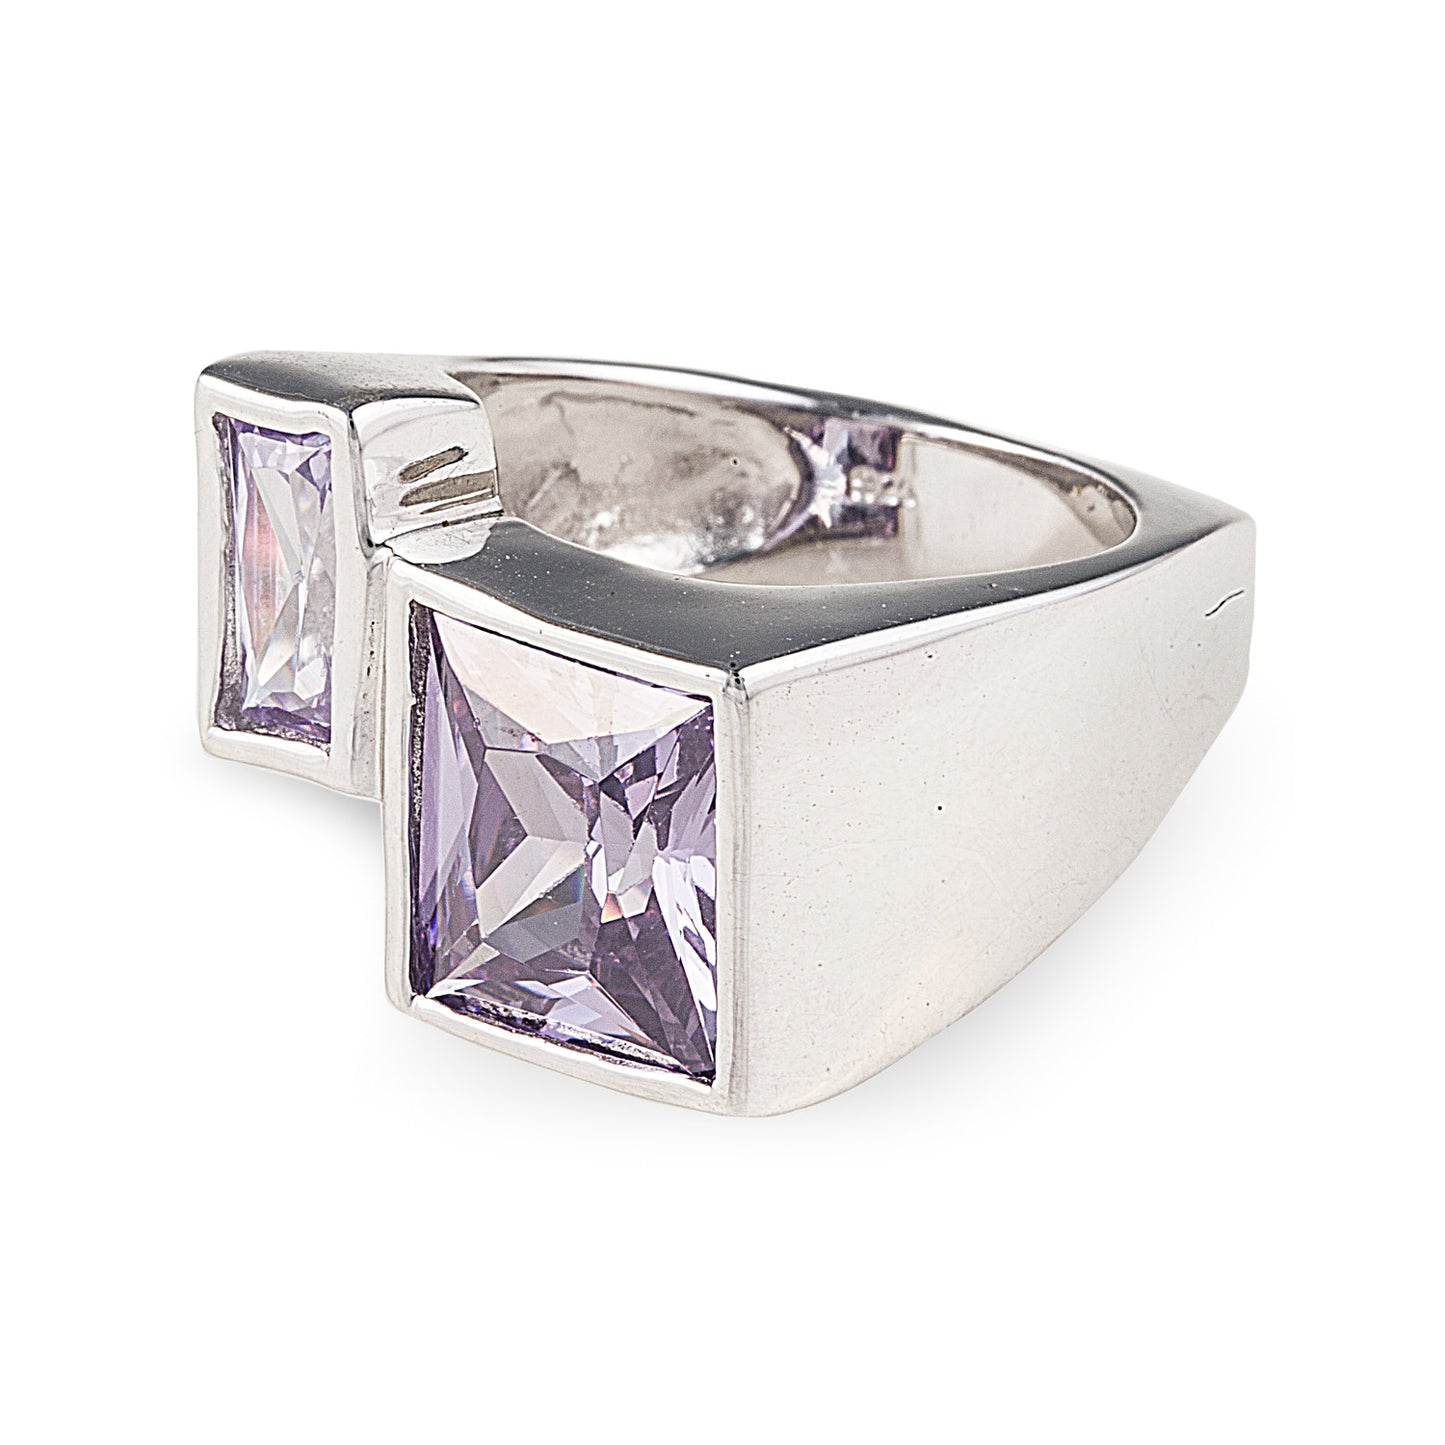 Amalfi Ring in 925 Sterling Silver featuring two purple princess cut stones set into a modern asymmetric design. Worldwide shipping. Jewellery by Bellagio & Co.